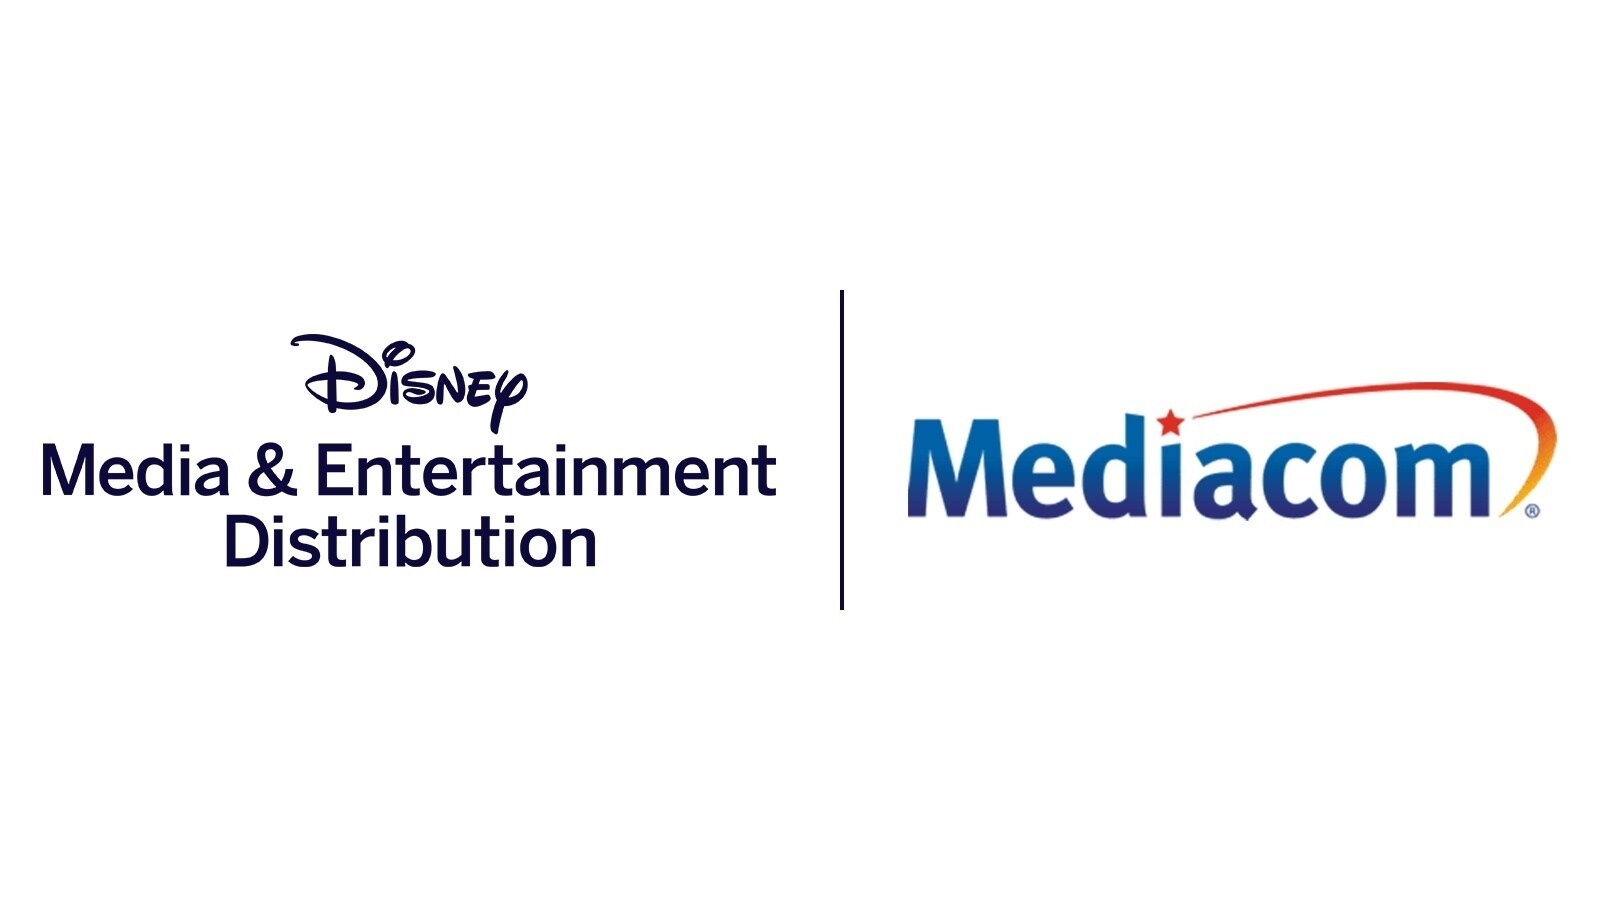 Disney Media & Entertainment Distribution and Mediacom Communications Announce Comprehensive Carriage Agreement